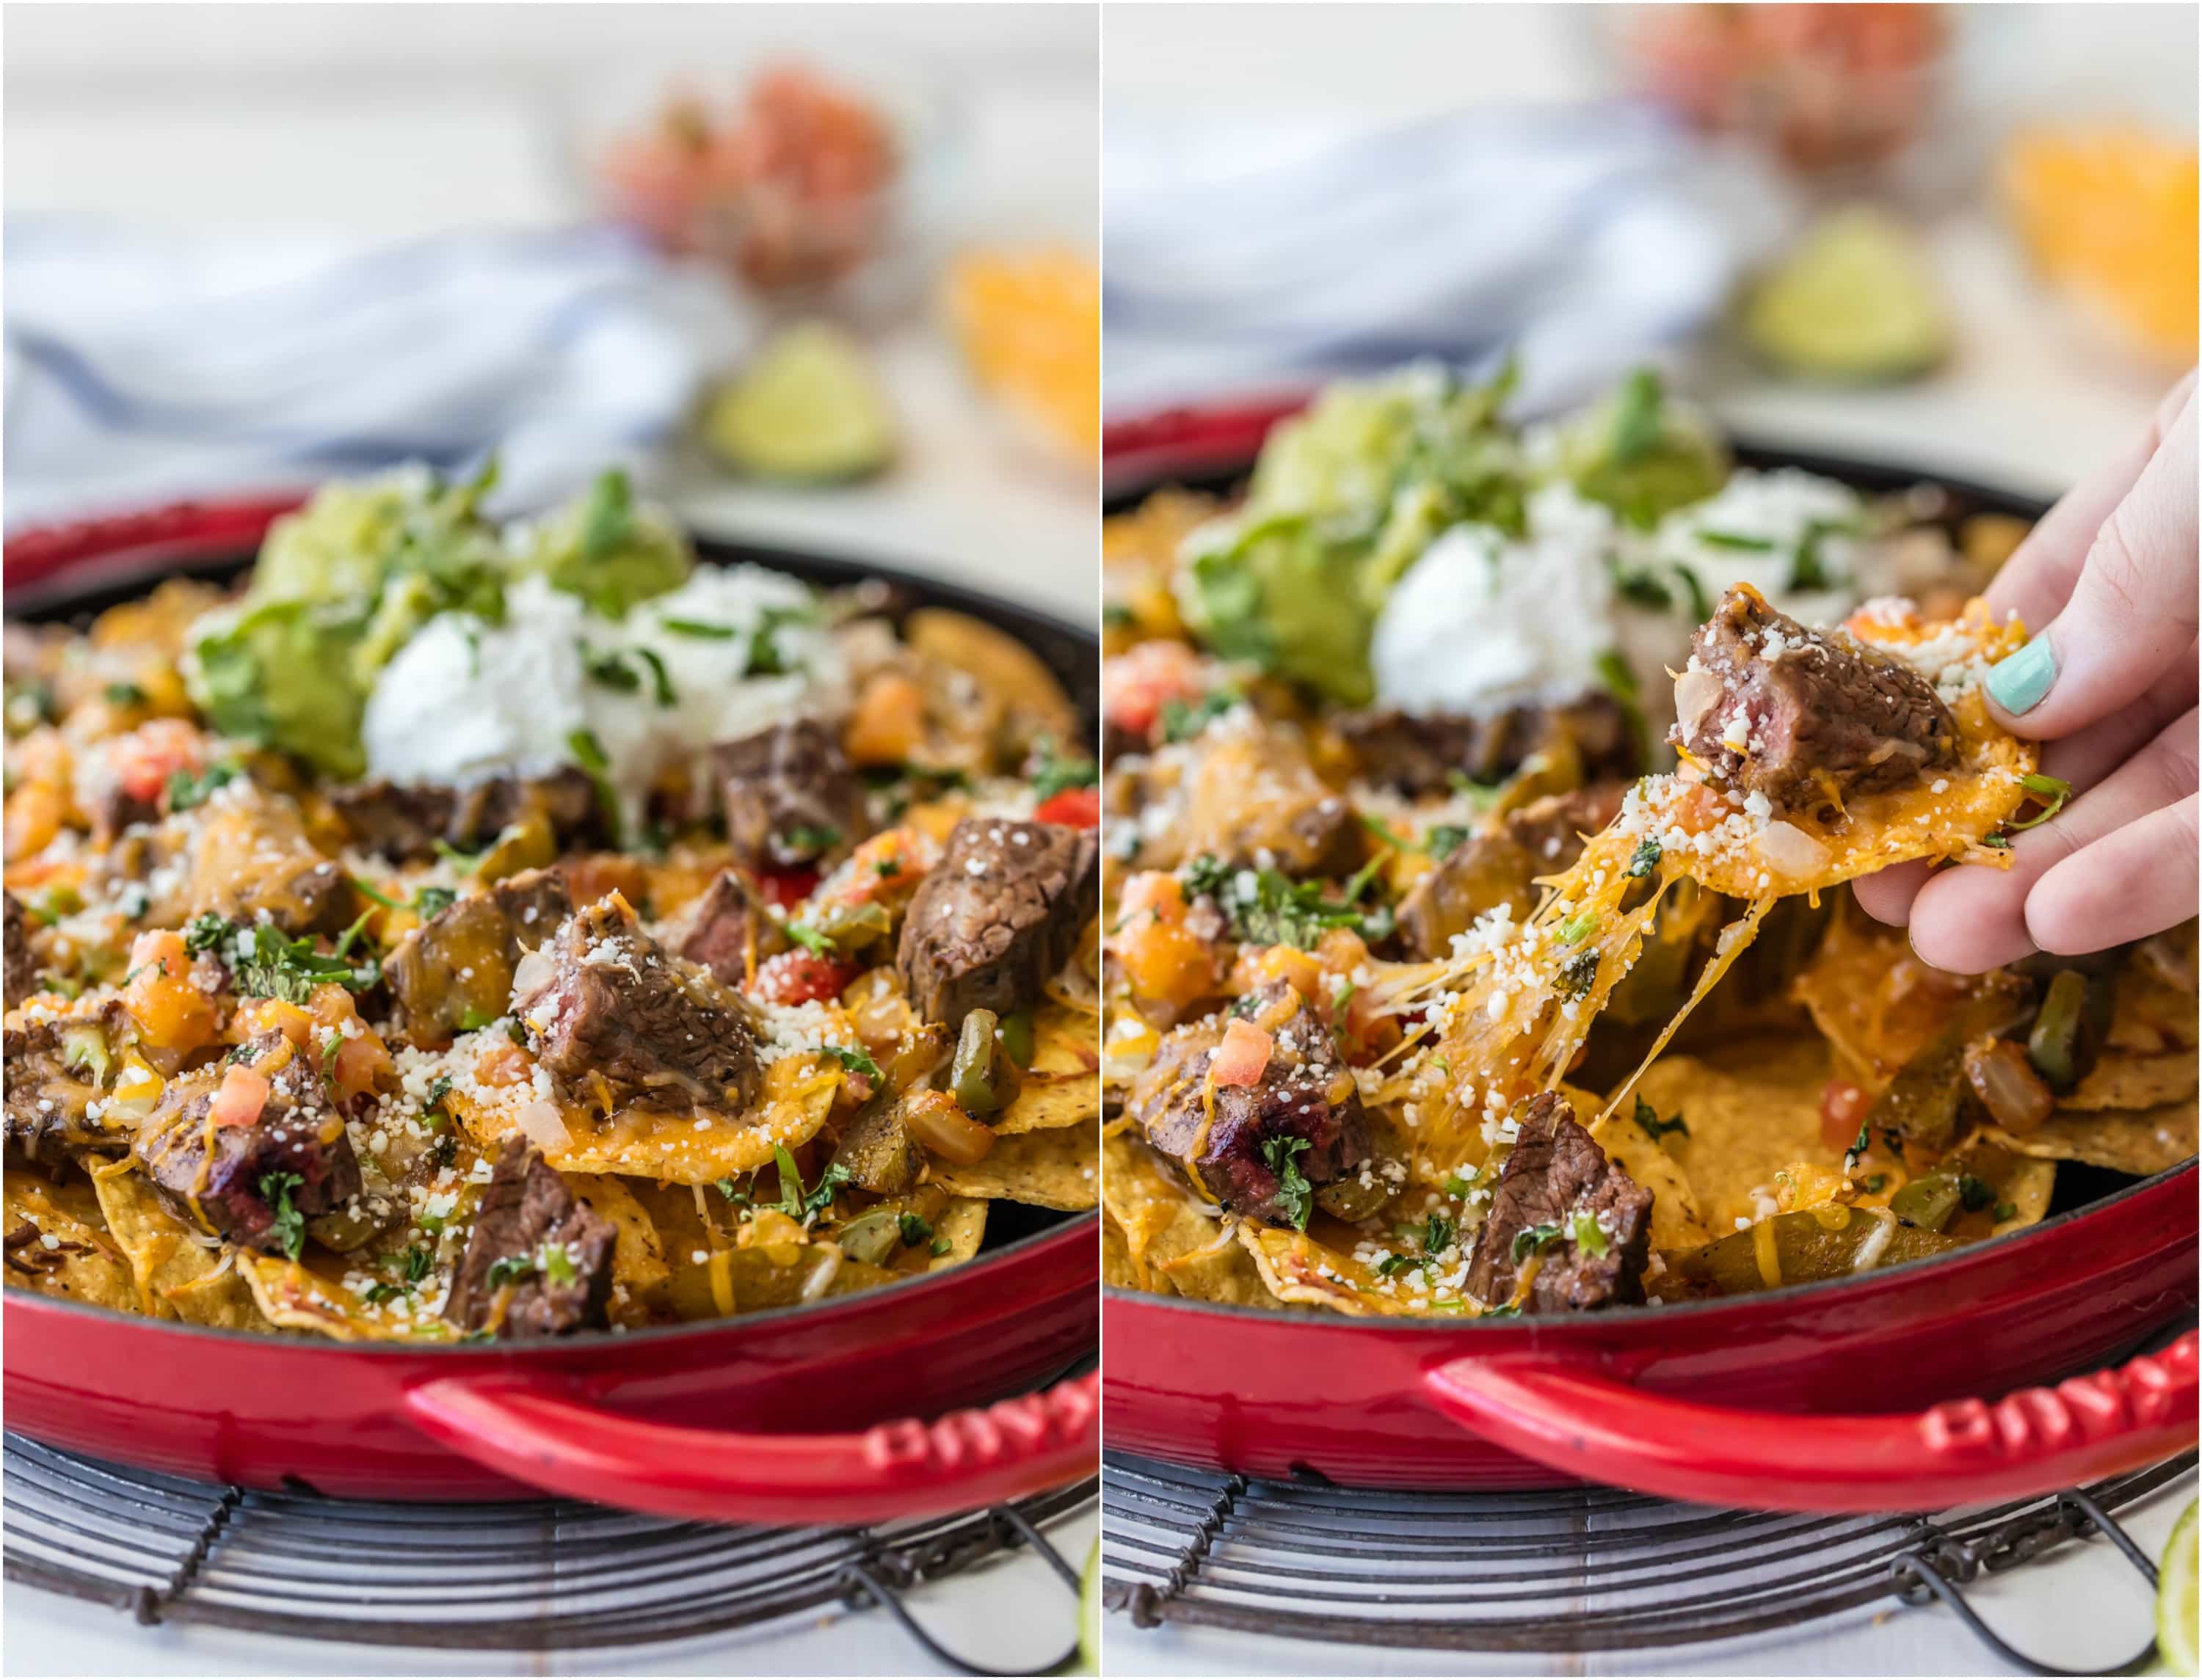 SKILLET STEAK FAJITA NACHOS are a must make for tailgating, the Super Bowl, or anytime! Loaded with marinated steak, peppers, onion, and cheese! BEST NACHOS EVER!